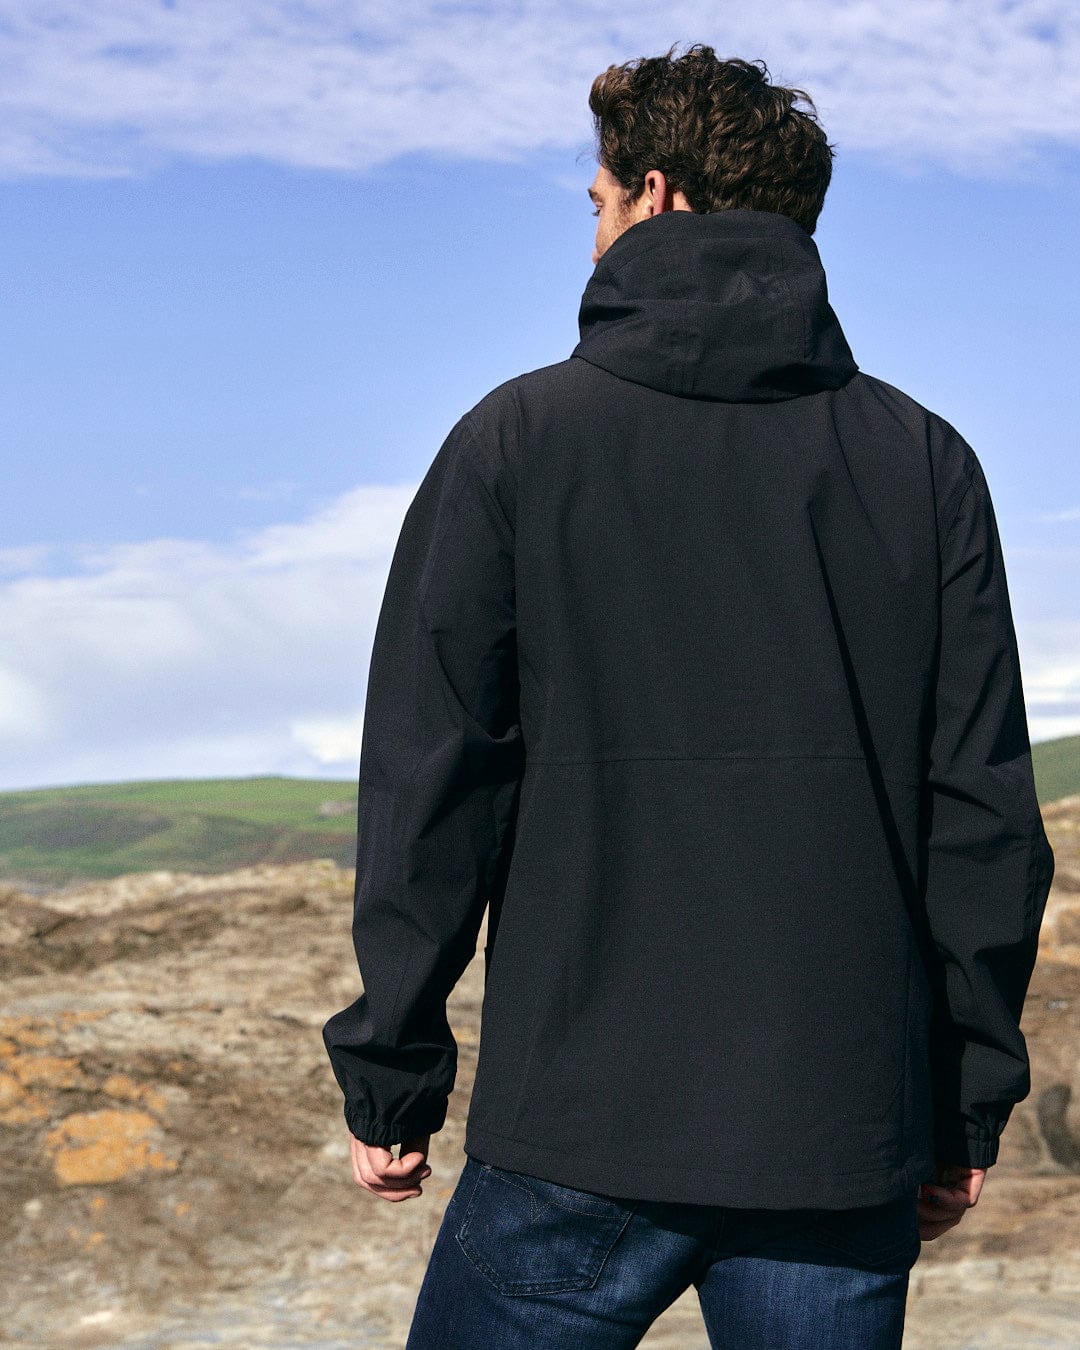 A man in a Saltrock Whistler - Mens Hooded Jacket - Black standing on a rocky beach.